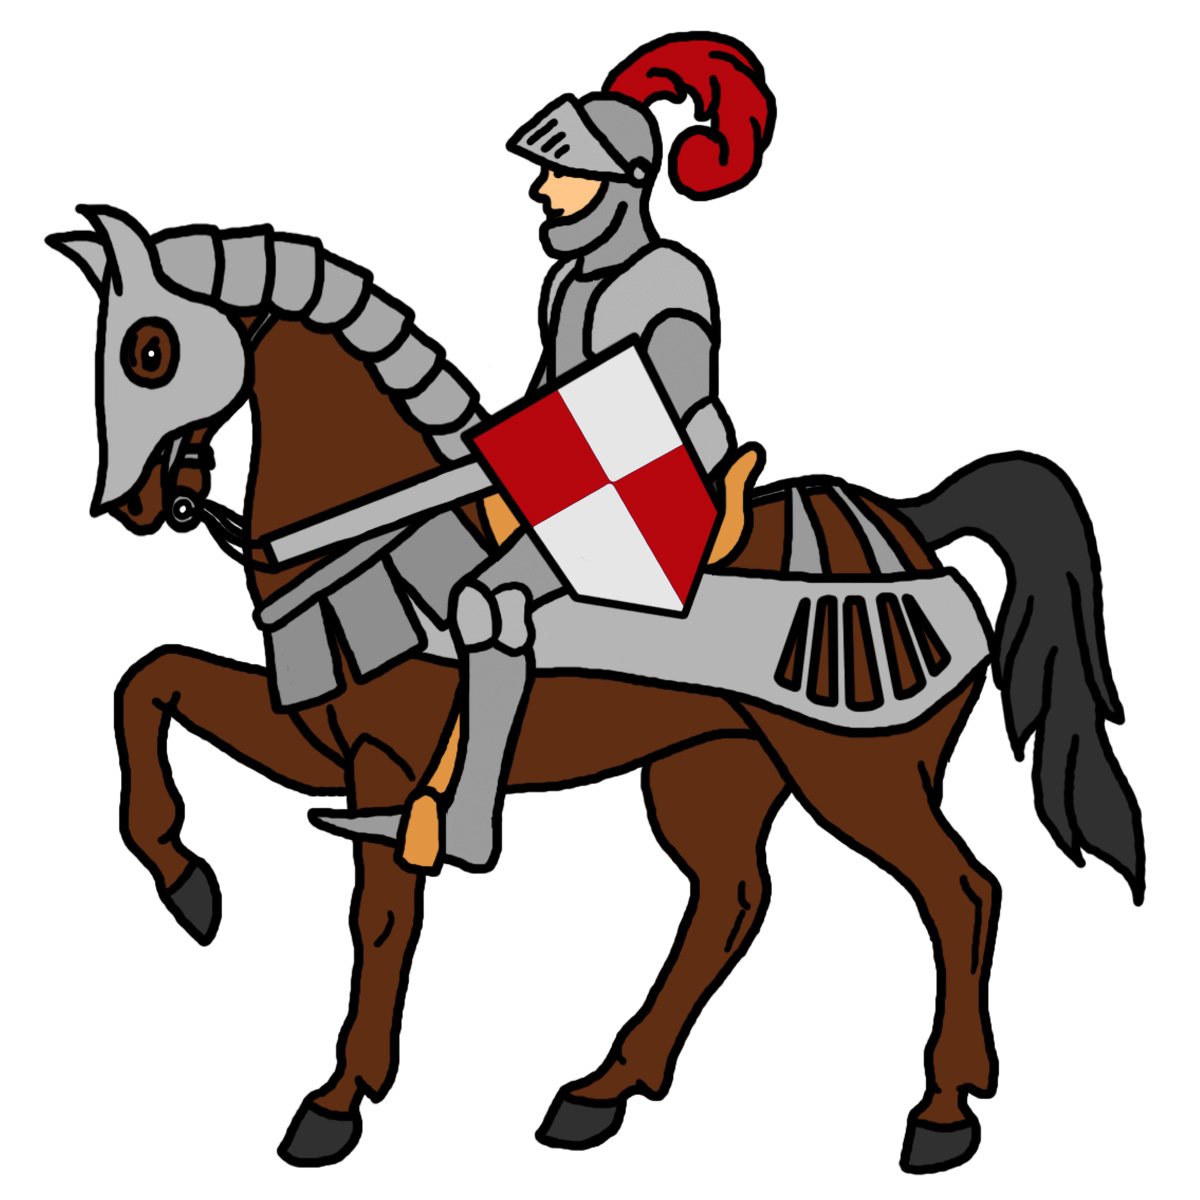 Pix For > Medieval Times Knights Clip Art